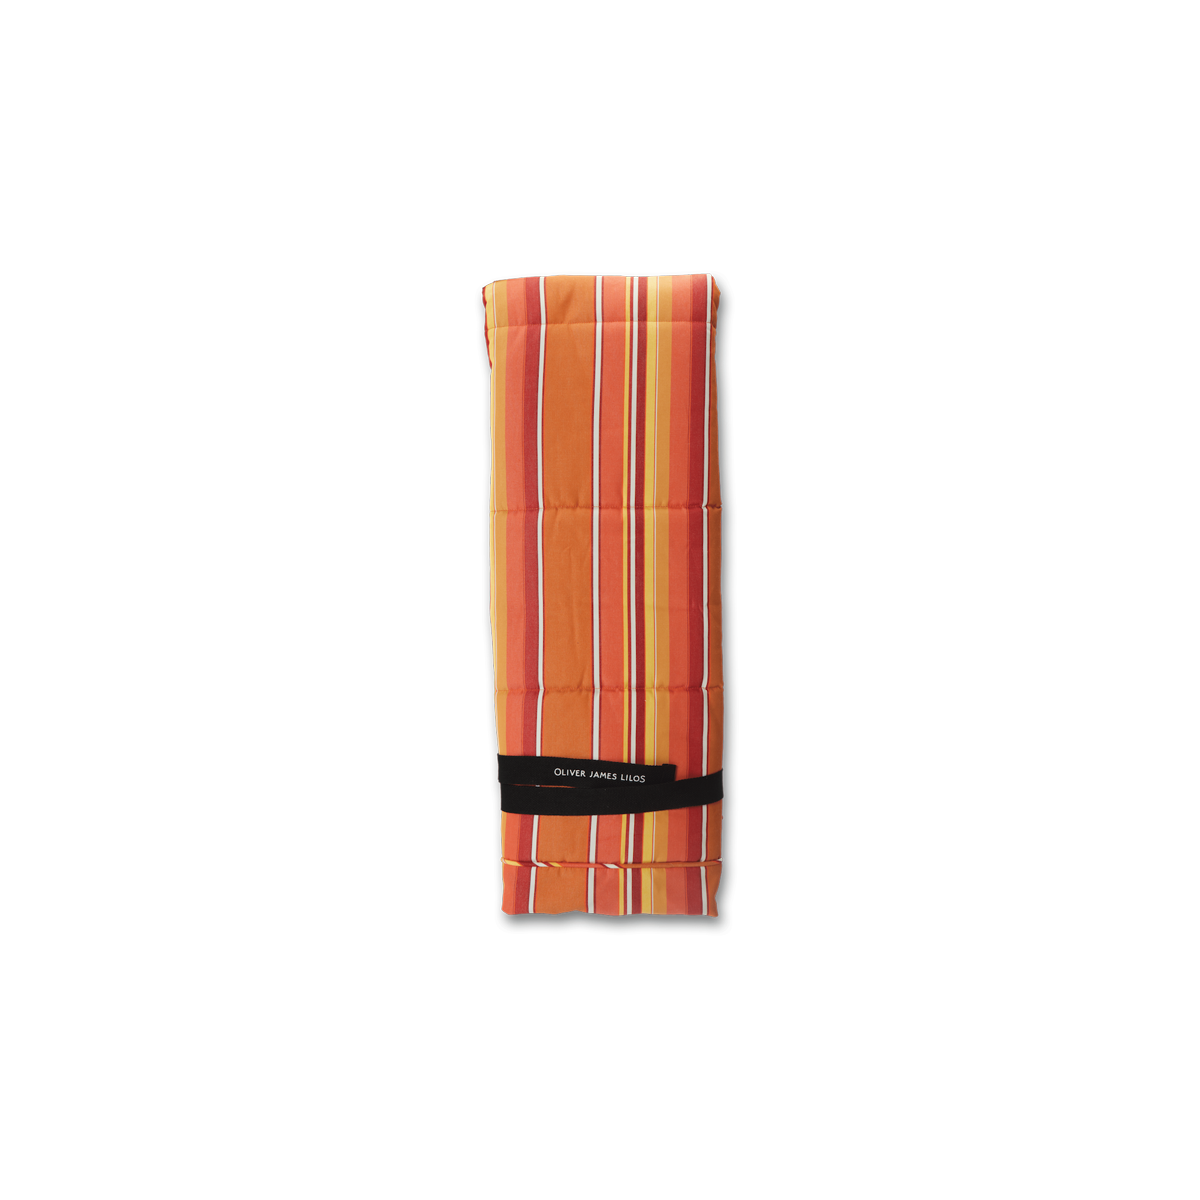 A front view of a luxury pool float hanging in a orange and white striped fabric.